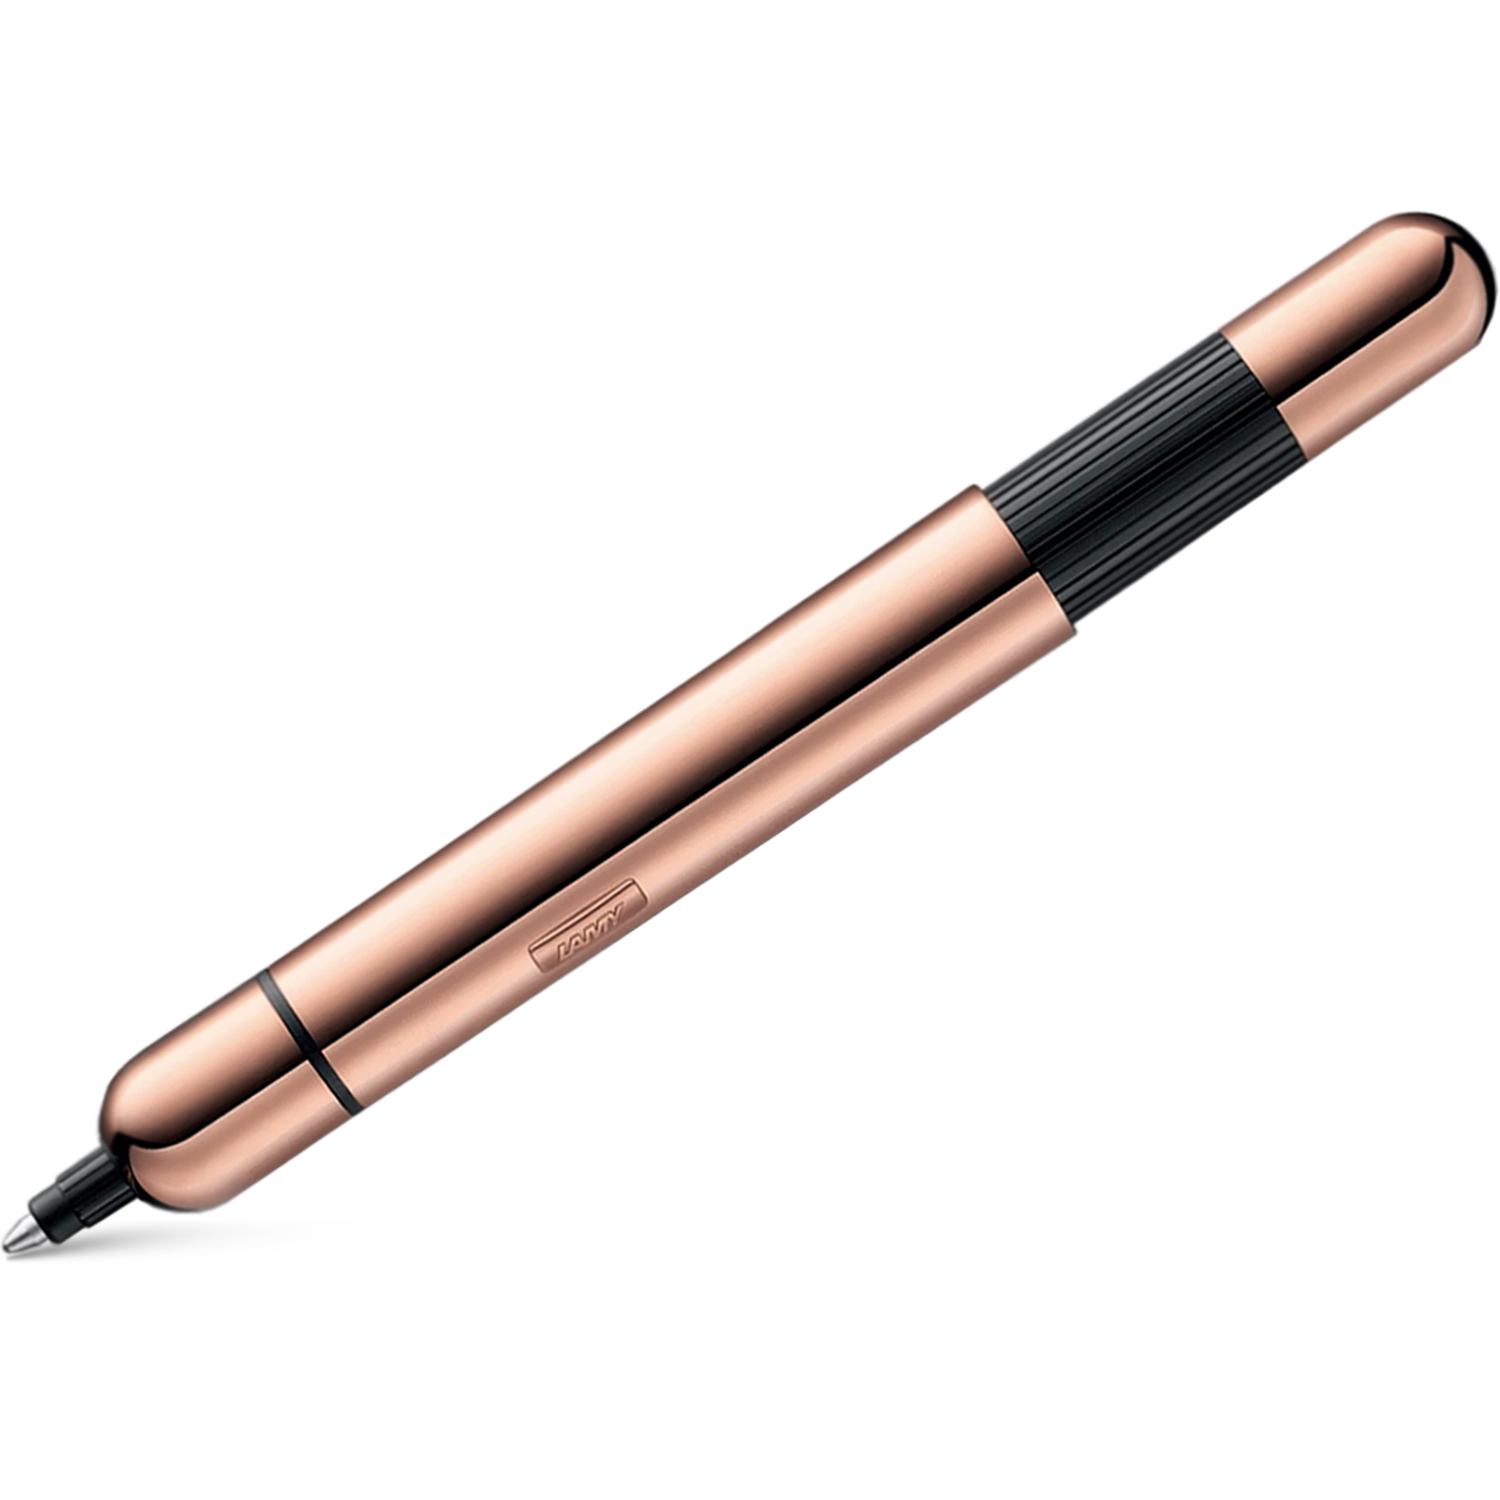 Lamy Pico Lx Ballpoint Pen - Rose Gold (Special Edition)